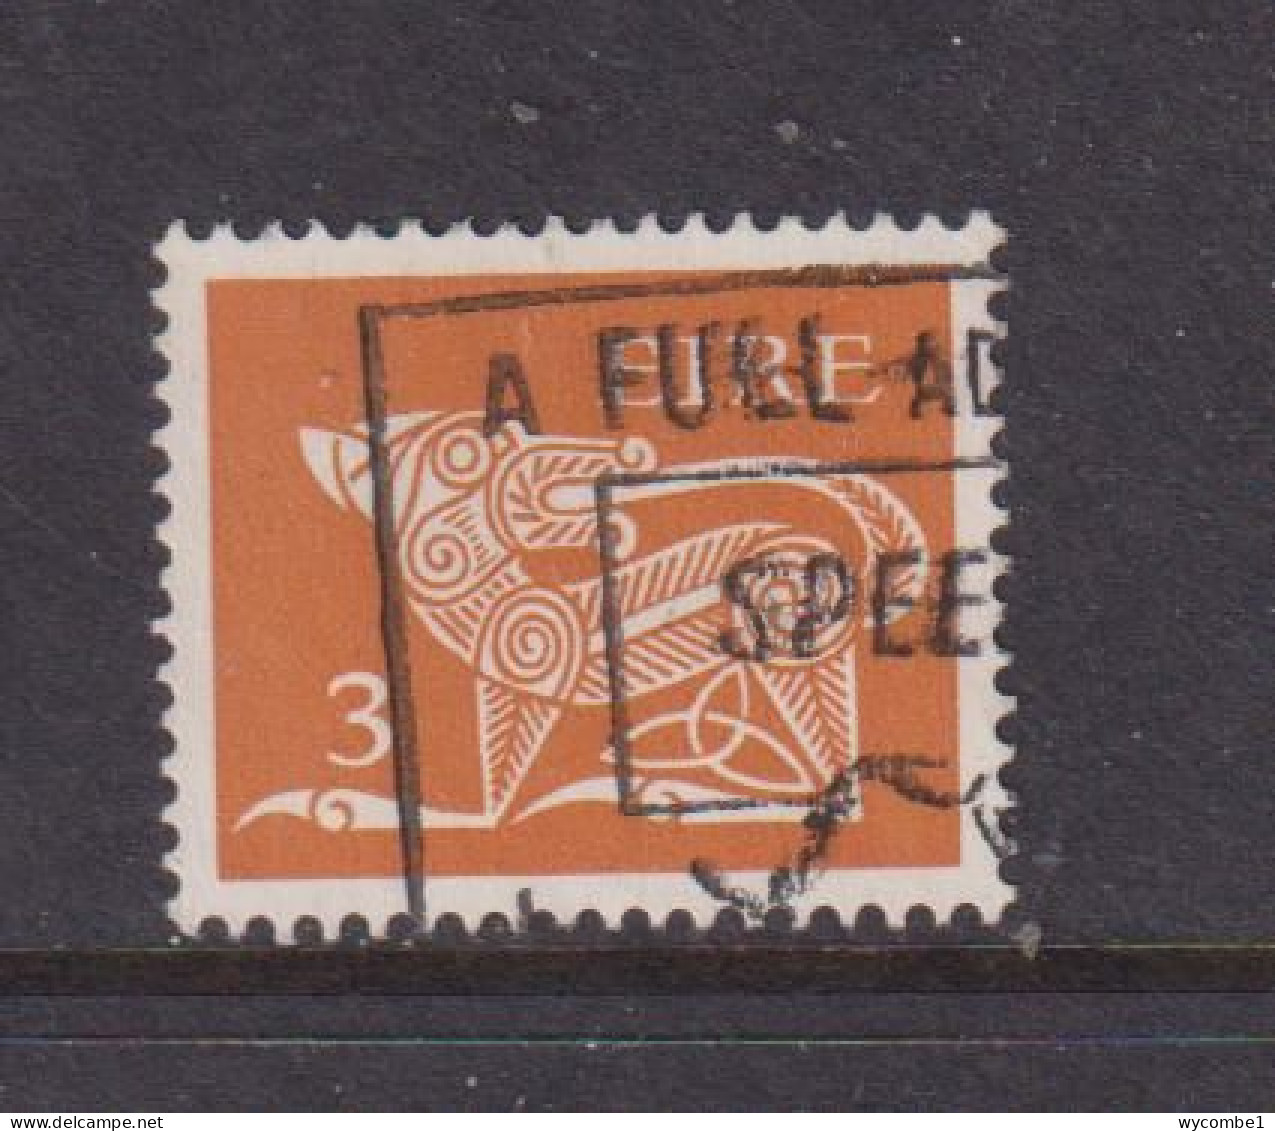 IRELAND - 1971  Decimal Currency Definitives  3p  Used As Scan - Usati